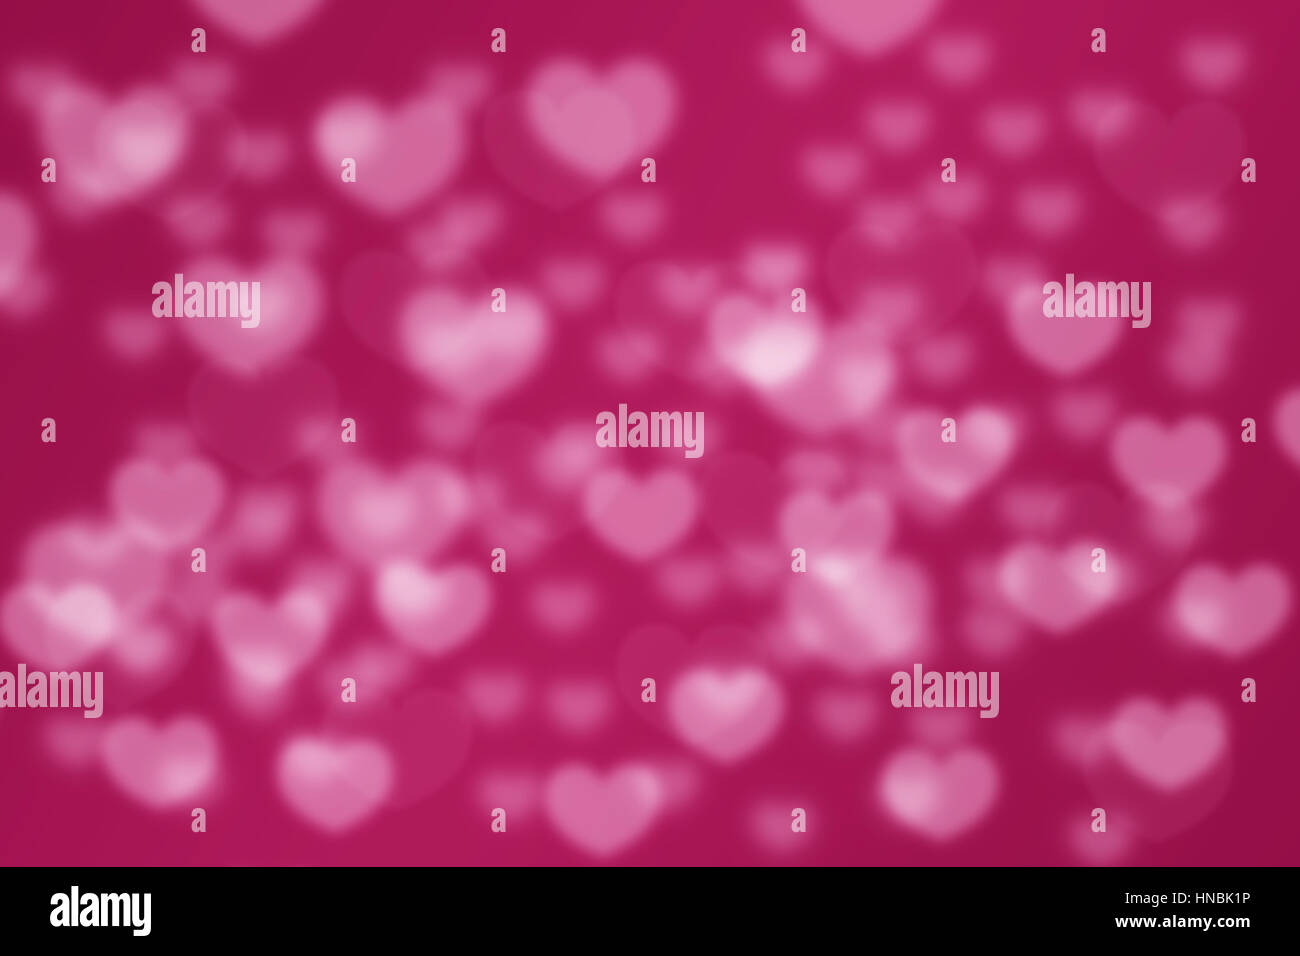 Abstract pink love hearts bokeh blurred background Stock Photo